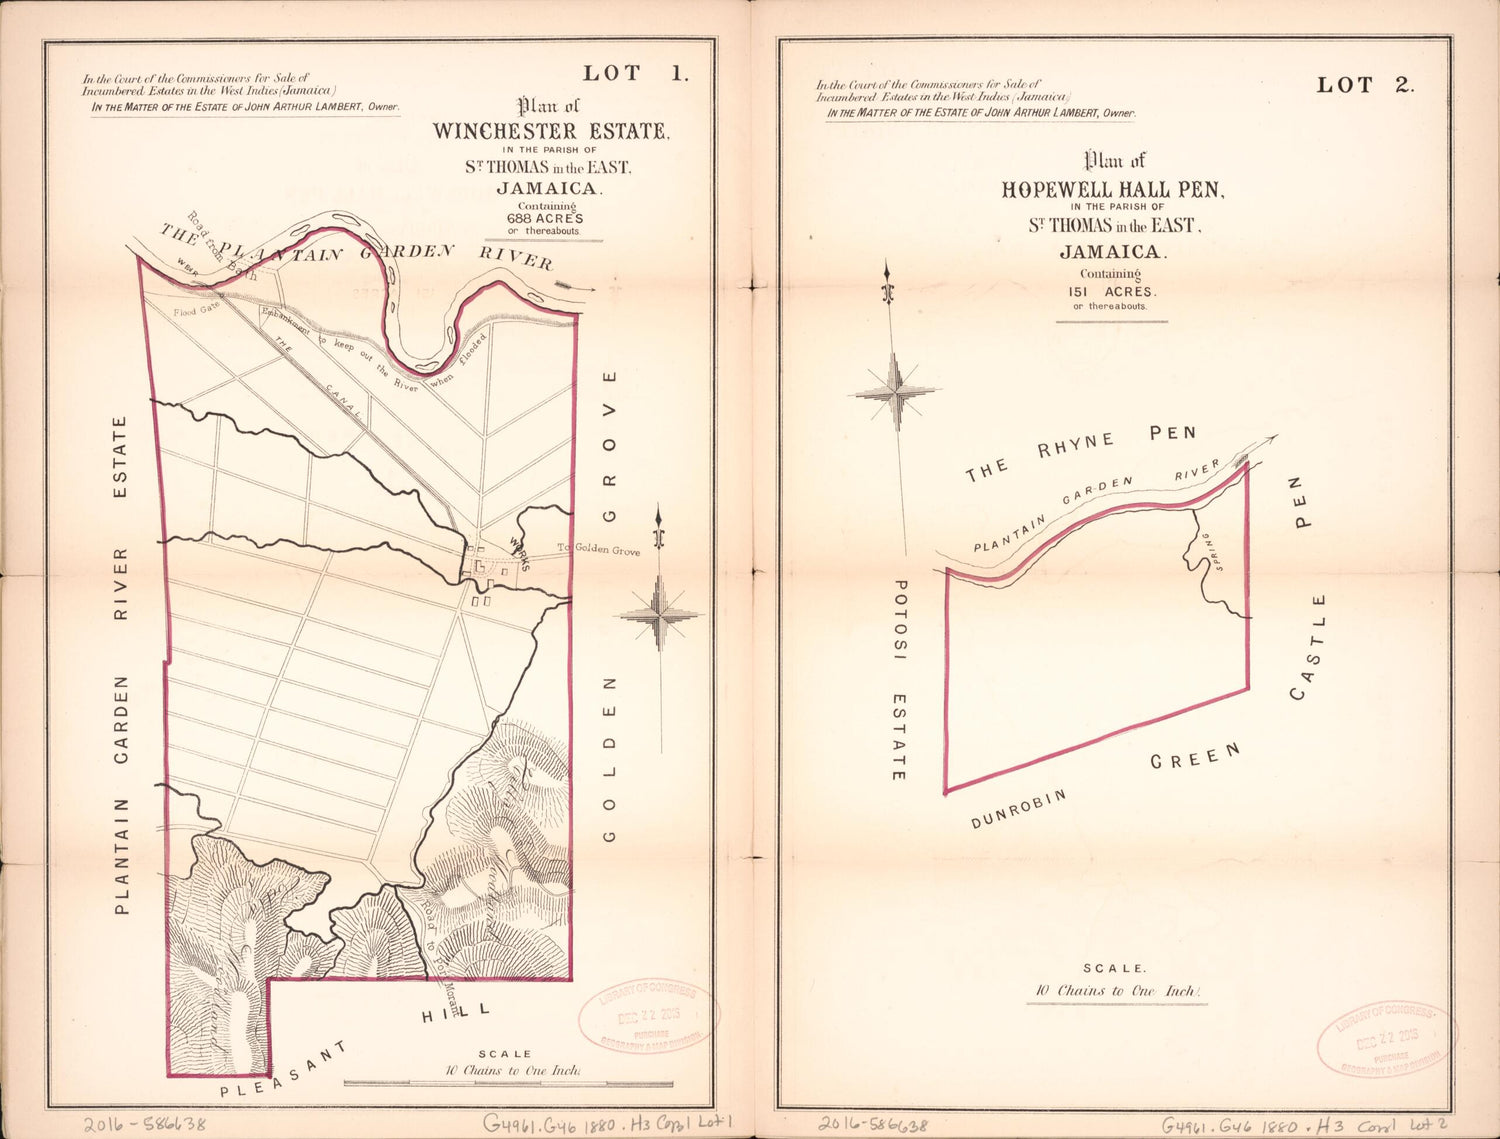 This old map of Lot 1. Plan of Winchester Estate; Lot 2. Plan of Hopewell Hall Pen from Encumbered Estates In the West Indies (Jamaica) from 1880 was created by Vaughan &amp; Jenkinson (Firm) Hards in 1880